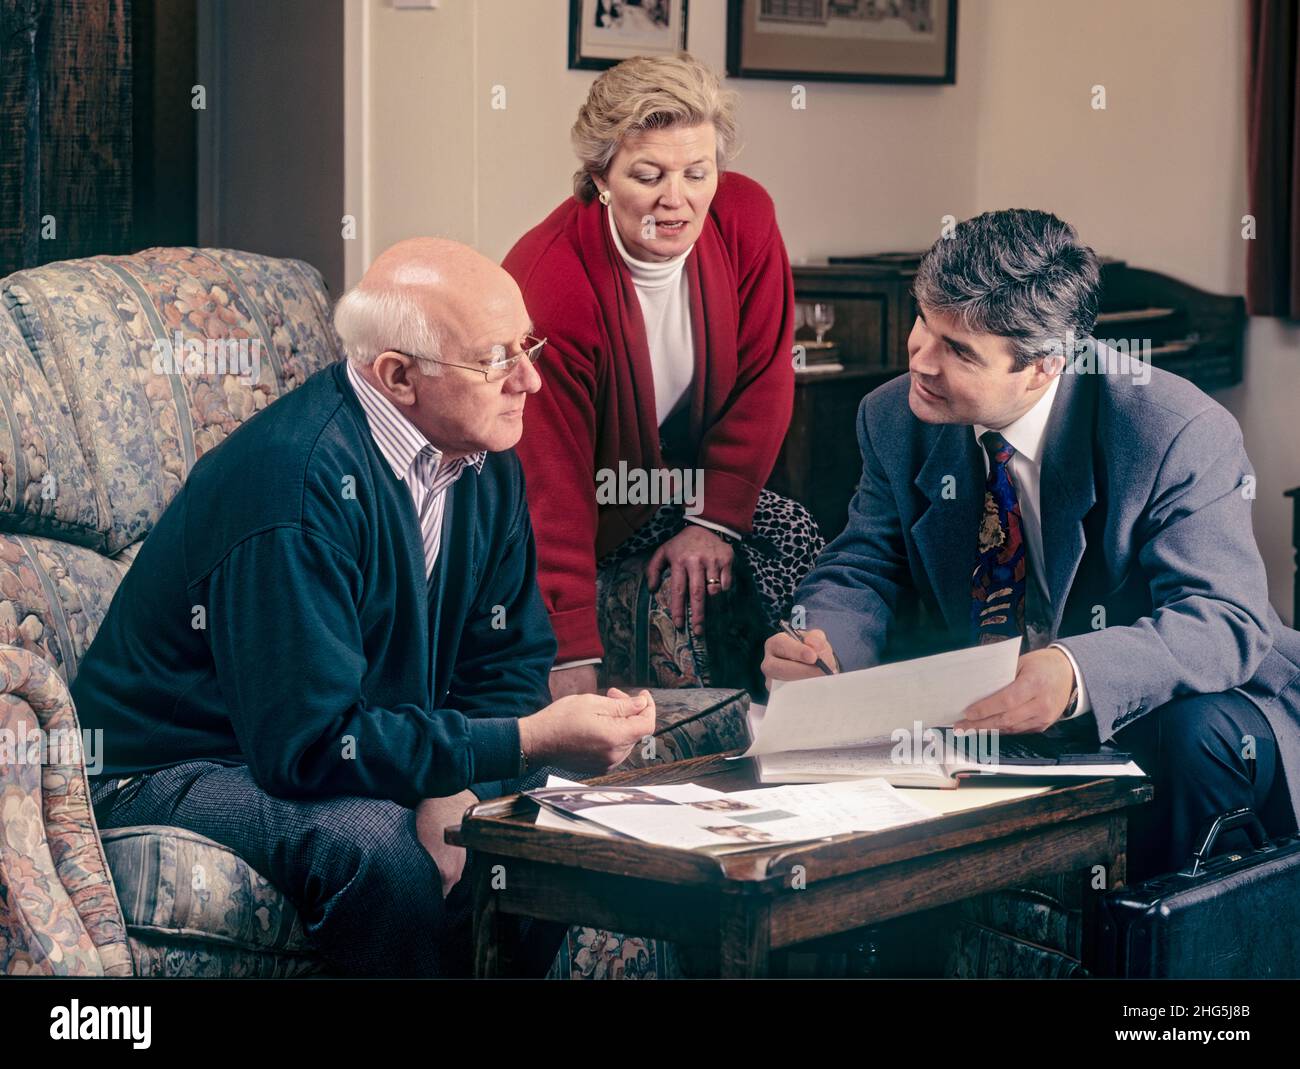 1990s Financial advisor with mature retired elderly couple at home 1990s era, talking to salesman sales person man, with variety of paperwork on table. Financial planning, home improvements, legal services, will wills writing etc. Archive 1990's home visit services salesman Stock Photo